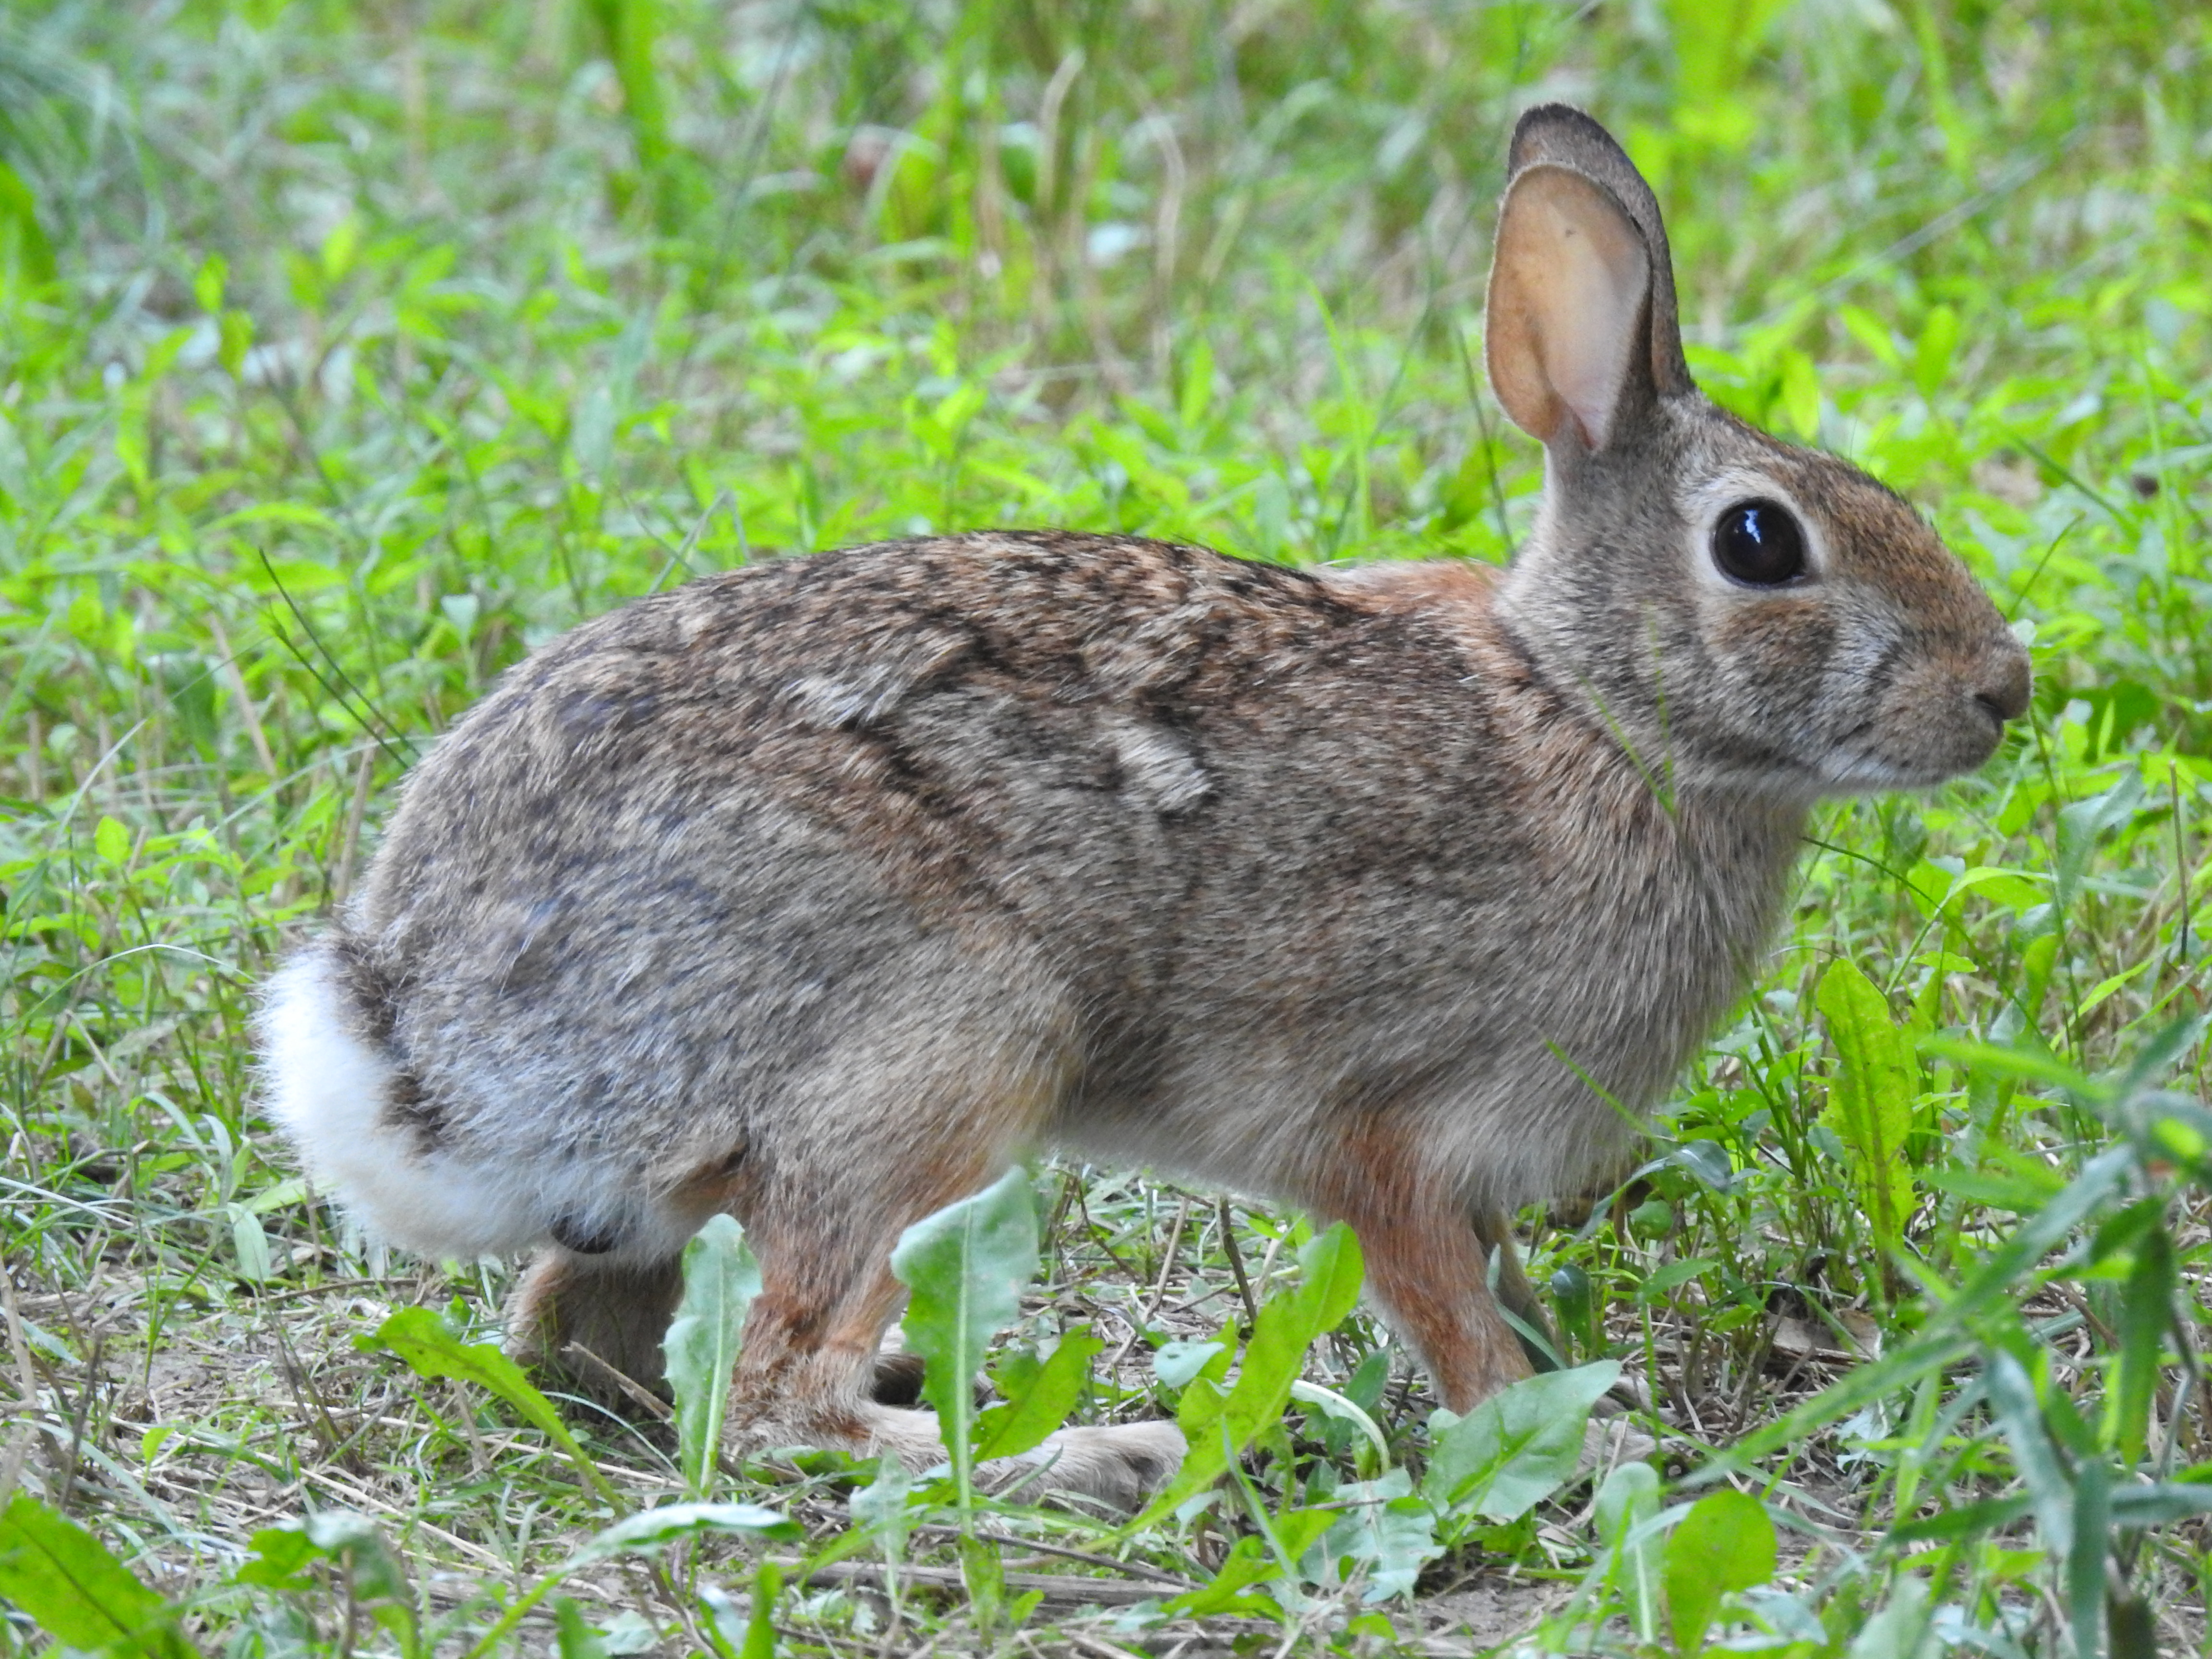 A rabbit sits in the grass